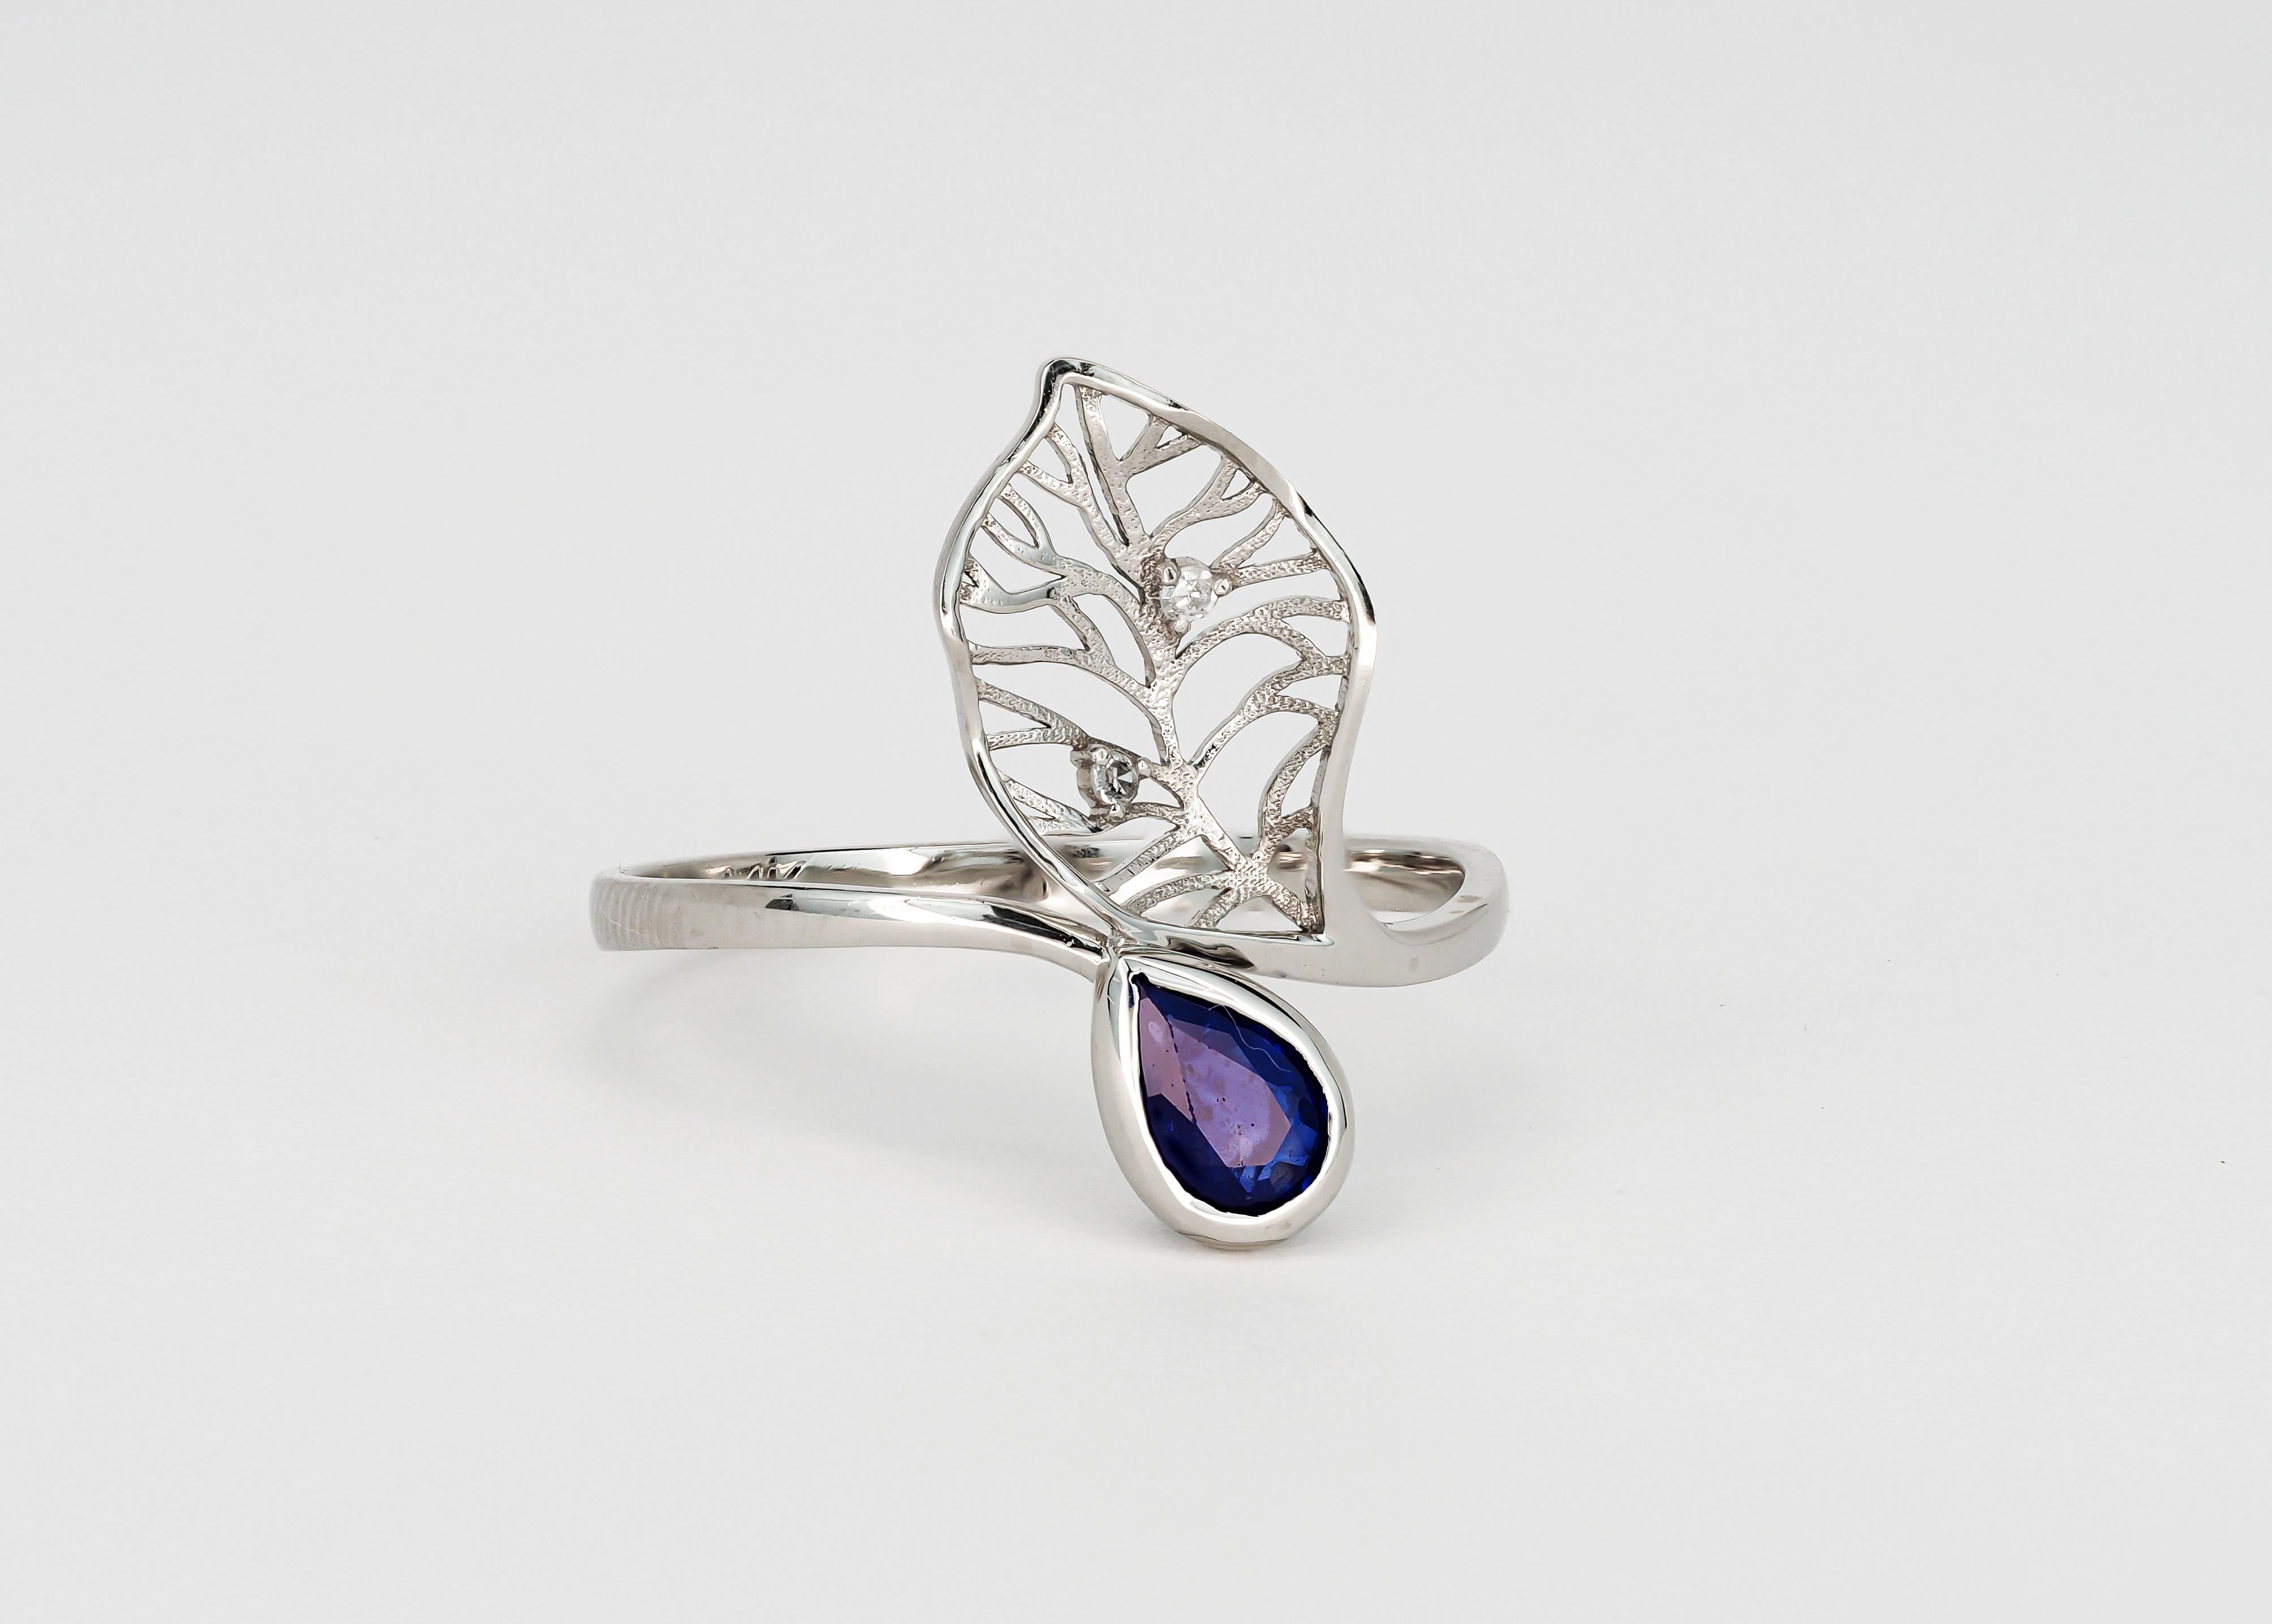 For Sale:  14k Gold Floral Design Ring with Sapphire and Diamonds, Leaf Ring 2